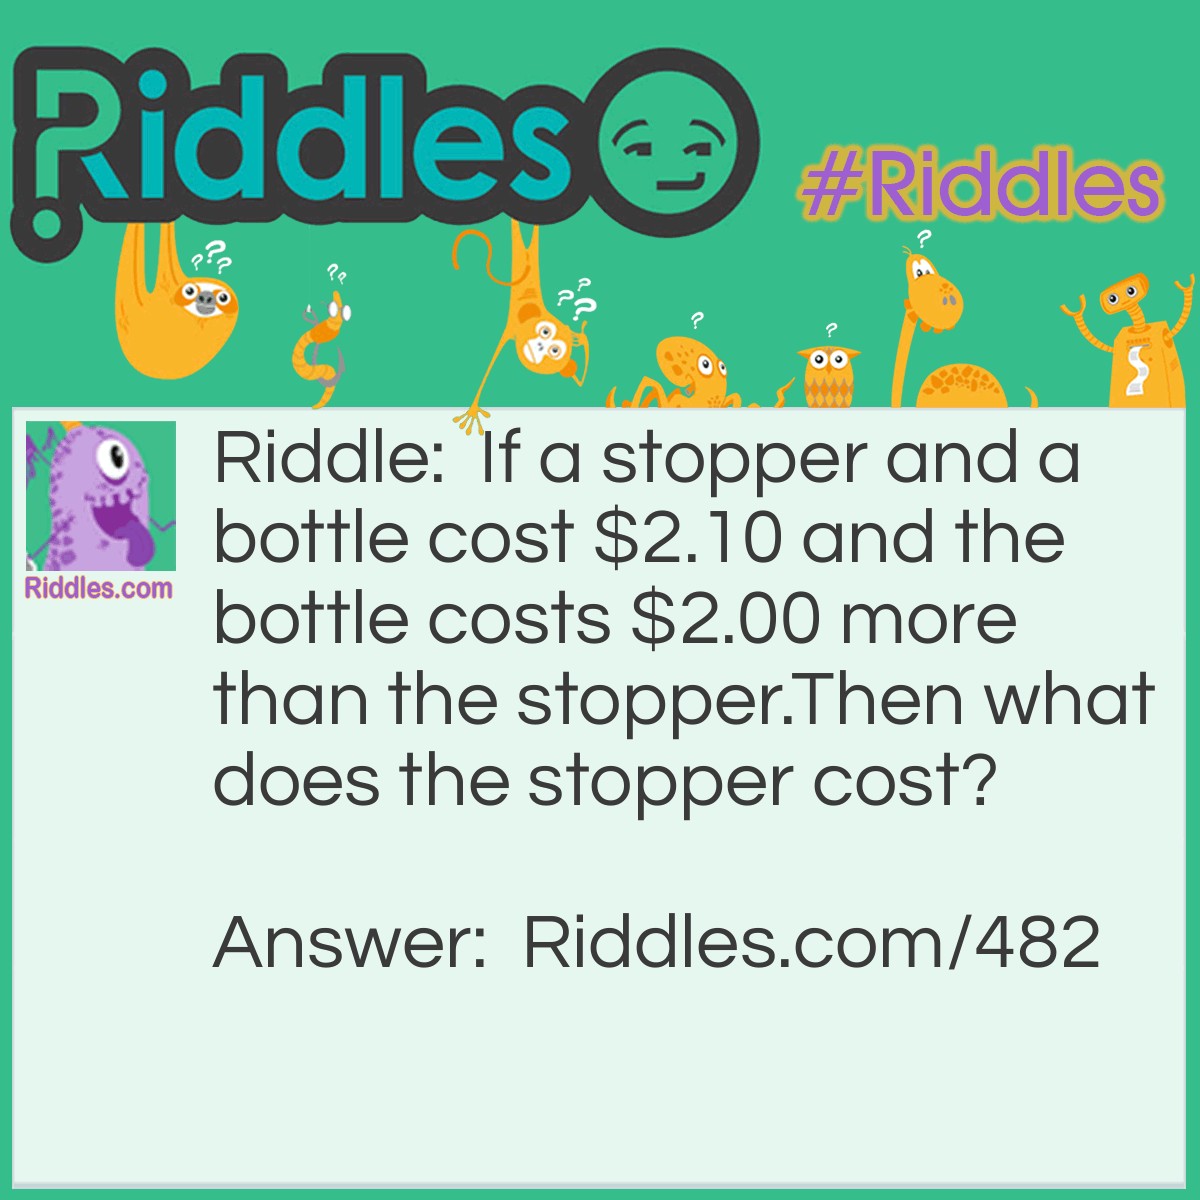 Riddle: If a stopper and a bottle cost $2.10 and the bottle costs $2.00 more than the stopper.
Then what does the stopper cost? Answer: Five Cents.